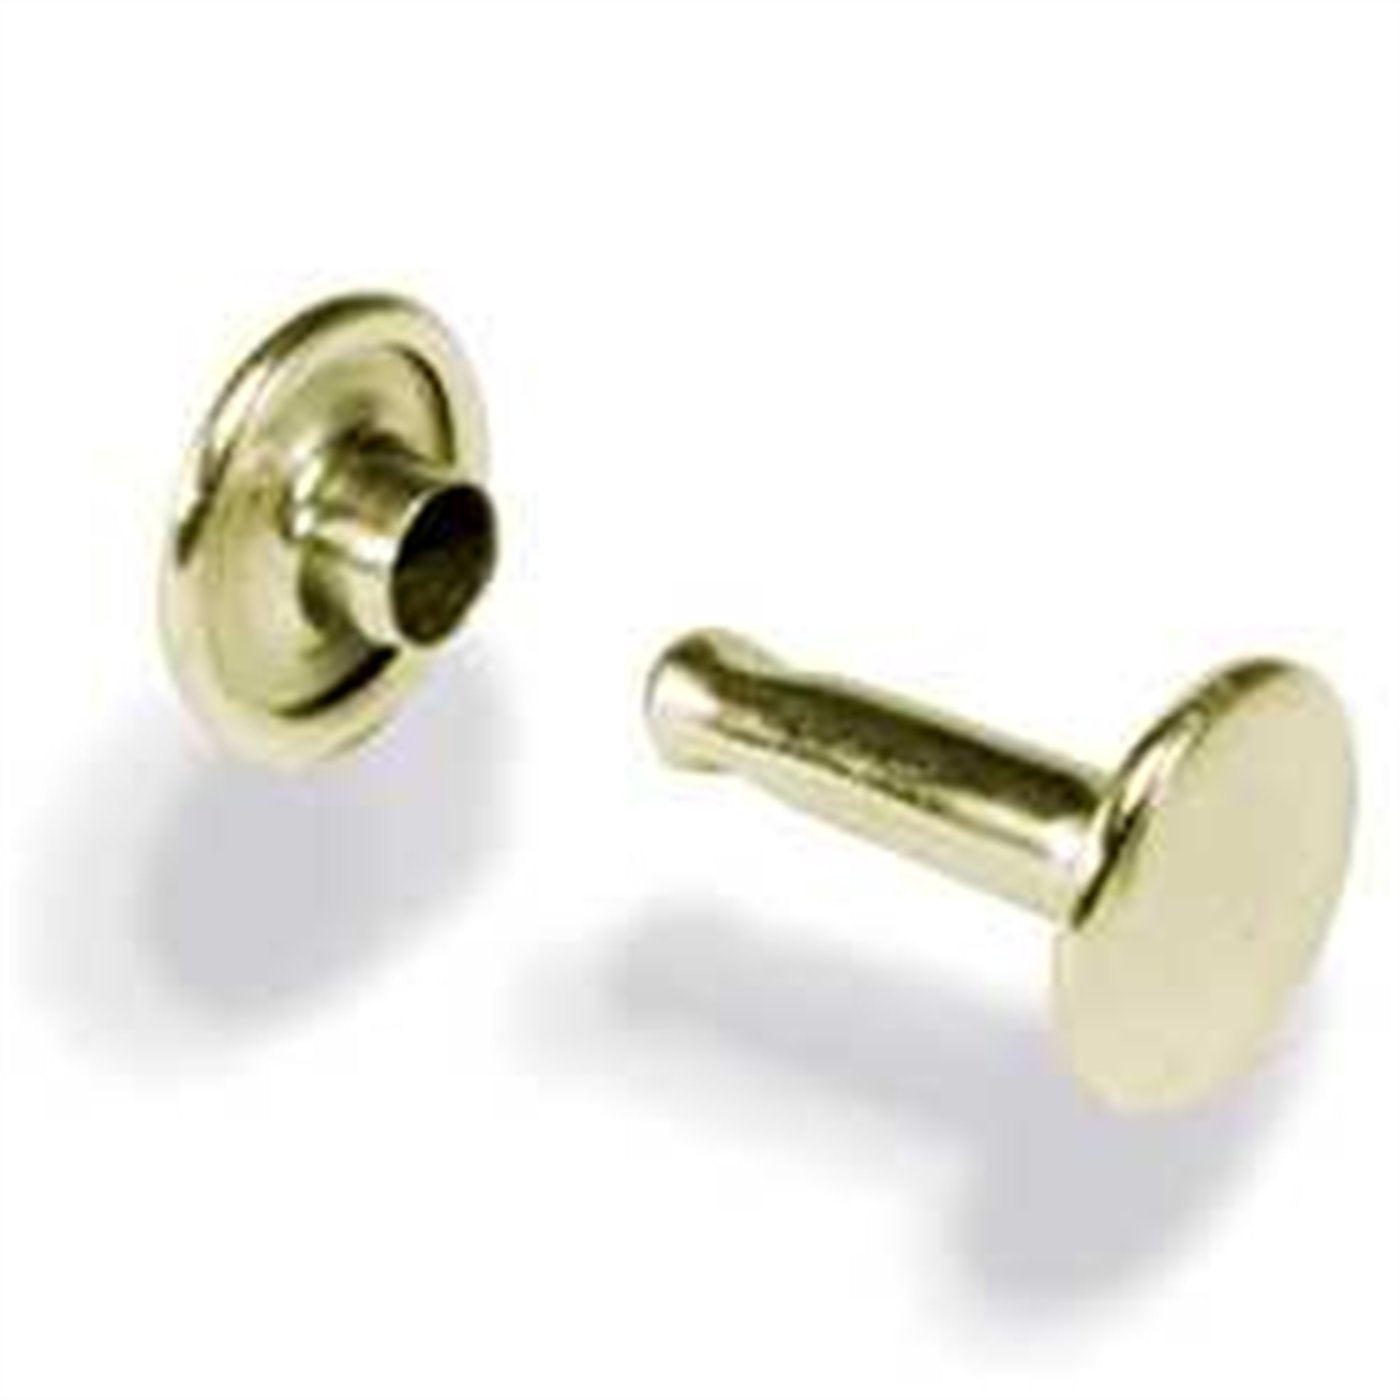 Tandy Leather Double Cap Rivets Large Brass Plate 100/pk 1375-11